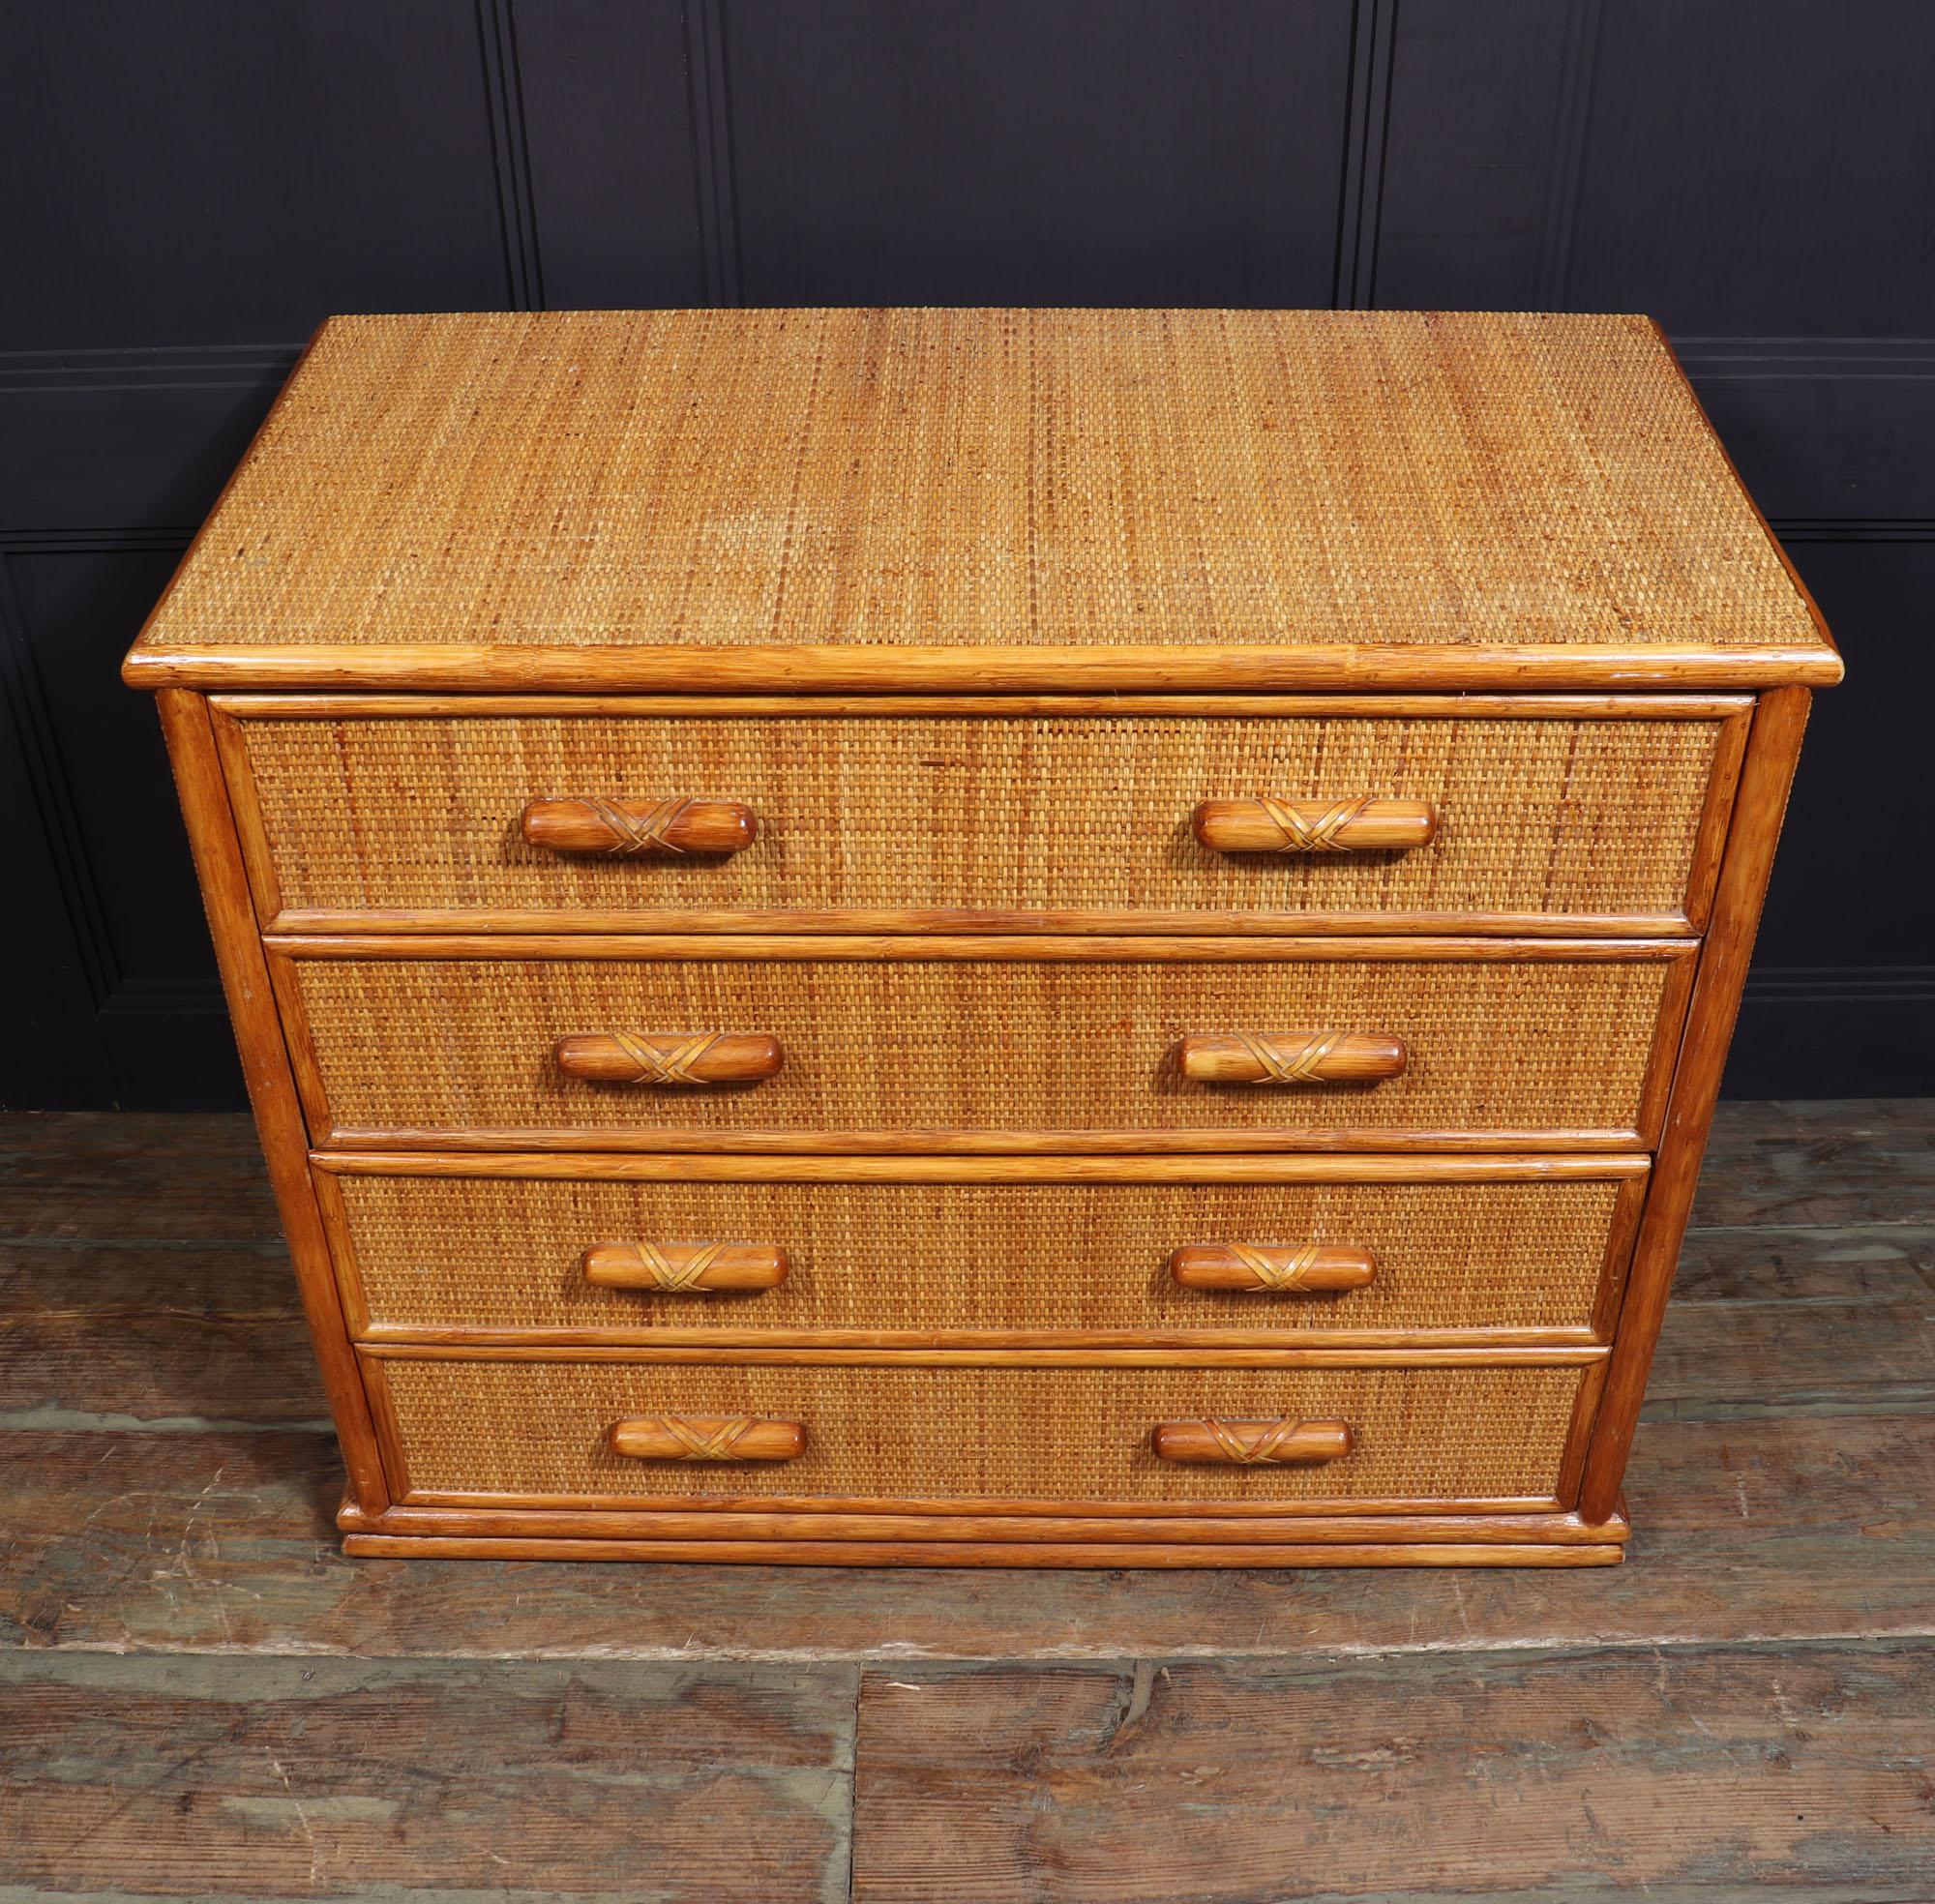 VINTAGE BAMBOO CHEST OF DRAWERS
A French design bamboo and rattan chest produced around 1970 with four long drawers faux bamboo surrounds, inset woven rattan, solid wood handles with crossed rattan detail, the drawers run smoothly as the should and